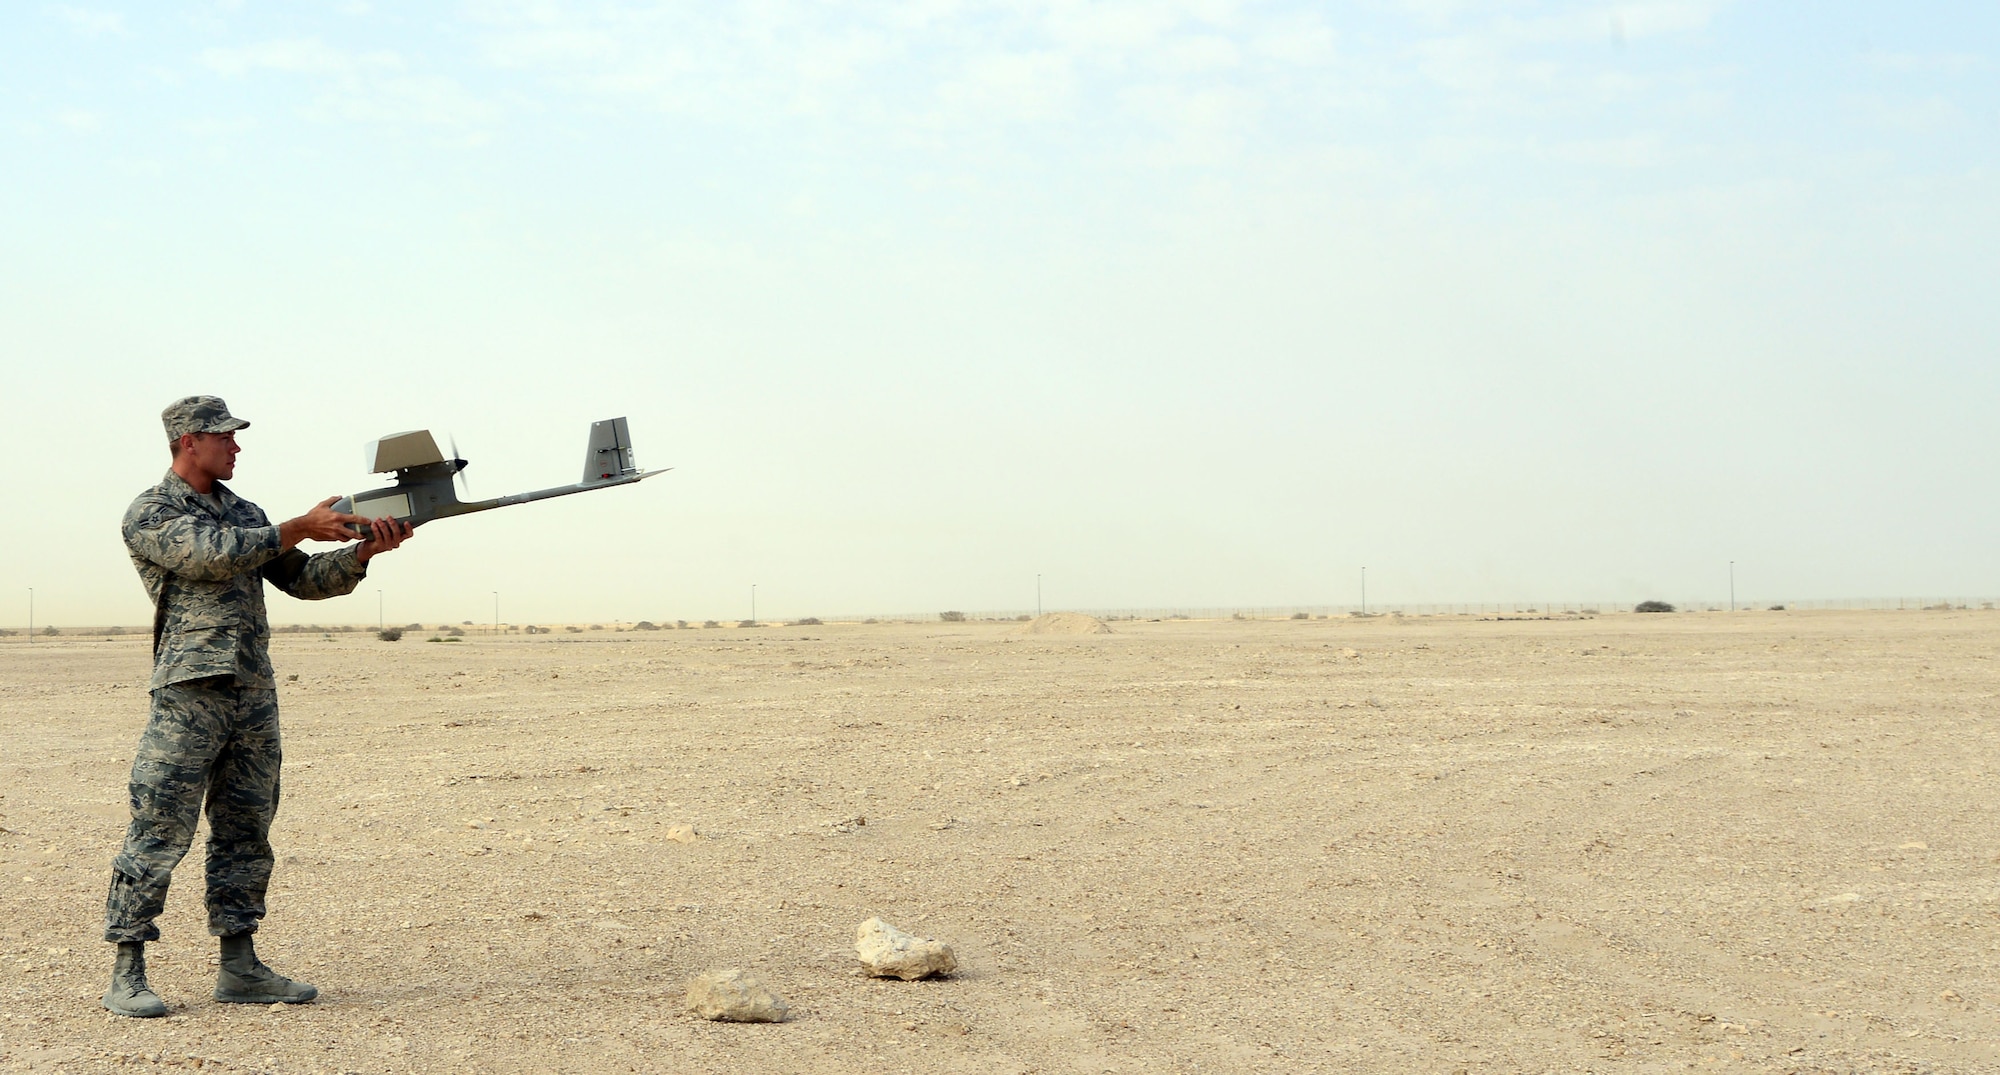 Airman Michael Puckett, 379th Expeditionary Security Forces Squadron, prepares to launch an R-11B Raven into the “wild blue yonder” during a demonstration for senior Qatari Air Force and 379th Air Expeditionary Wing leaders, Mar 4, 2015, at Al Udeid Air Base, Qatar.  The RQ-11 Raven is a lightweight unmanned aircraft system that’s designed for rapid deployment and high-mobility for military operations. At Al Udeid, security forces Airmen use the Raven to support anti-terrorism measures like day or night aerial intelligence, surveillance, target acquisition, and reconnaissance. This is the first time since 2005 that the Raven has been used at Al Udeid. (Air Force photo by Master Sgt. Kerry Jackson) 